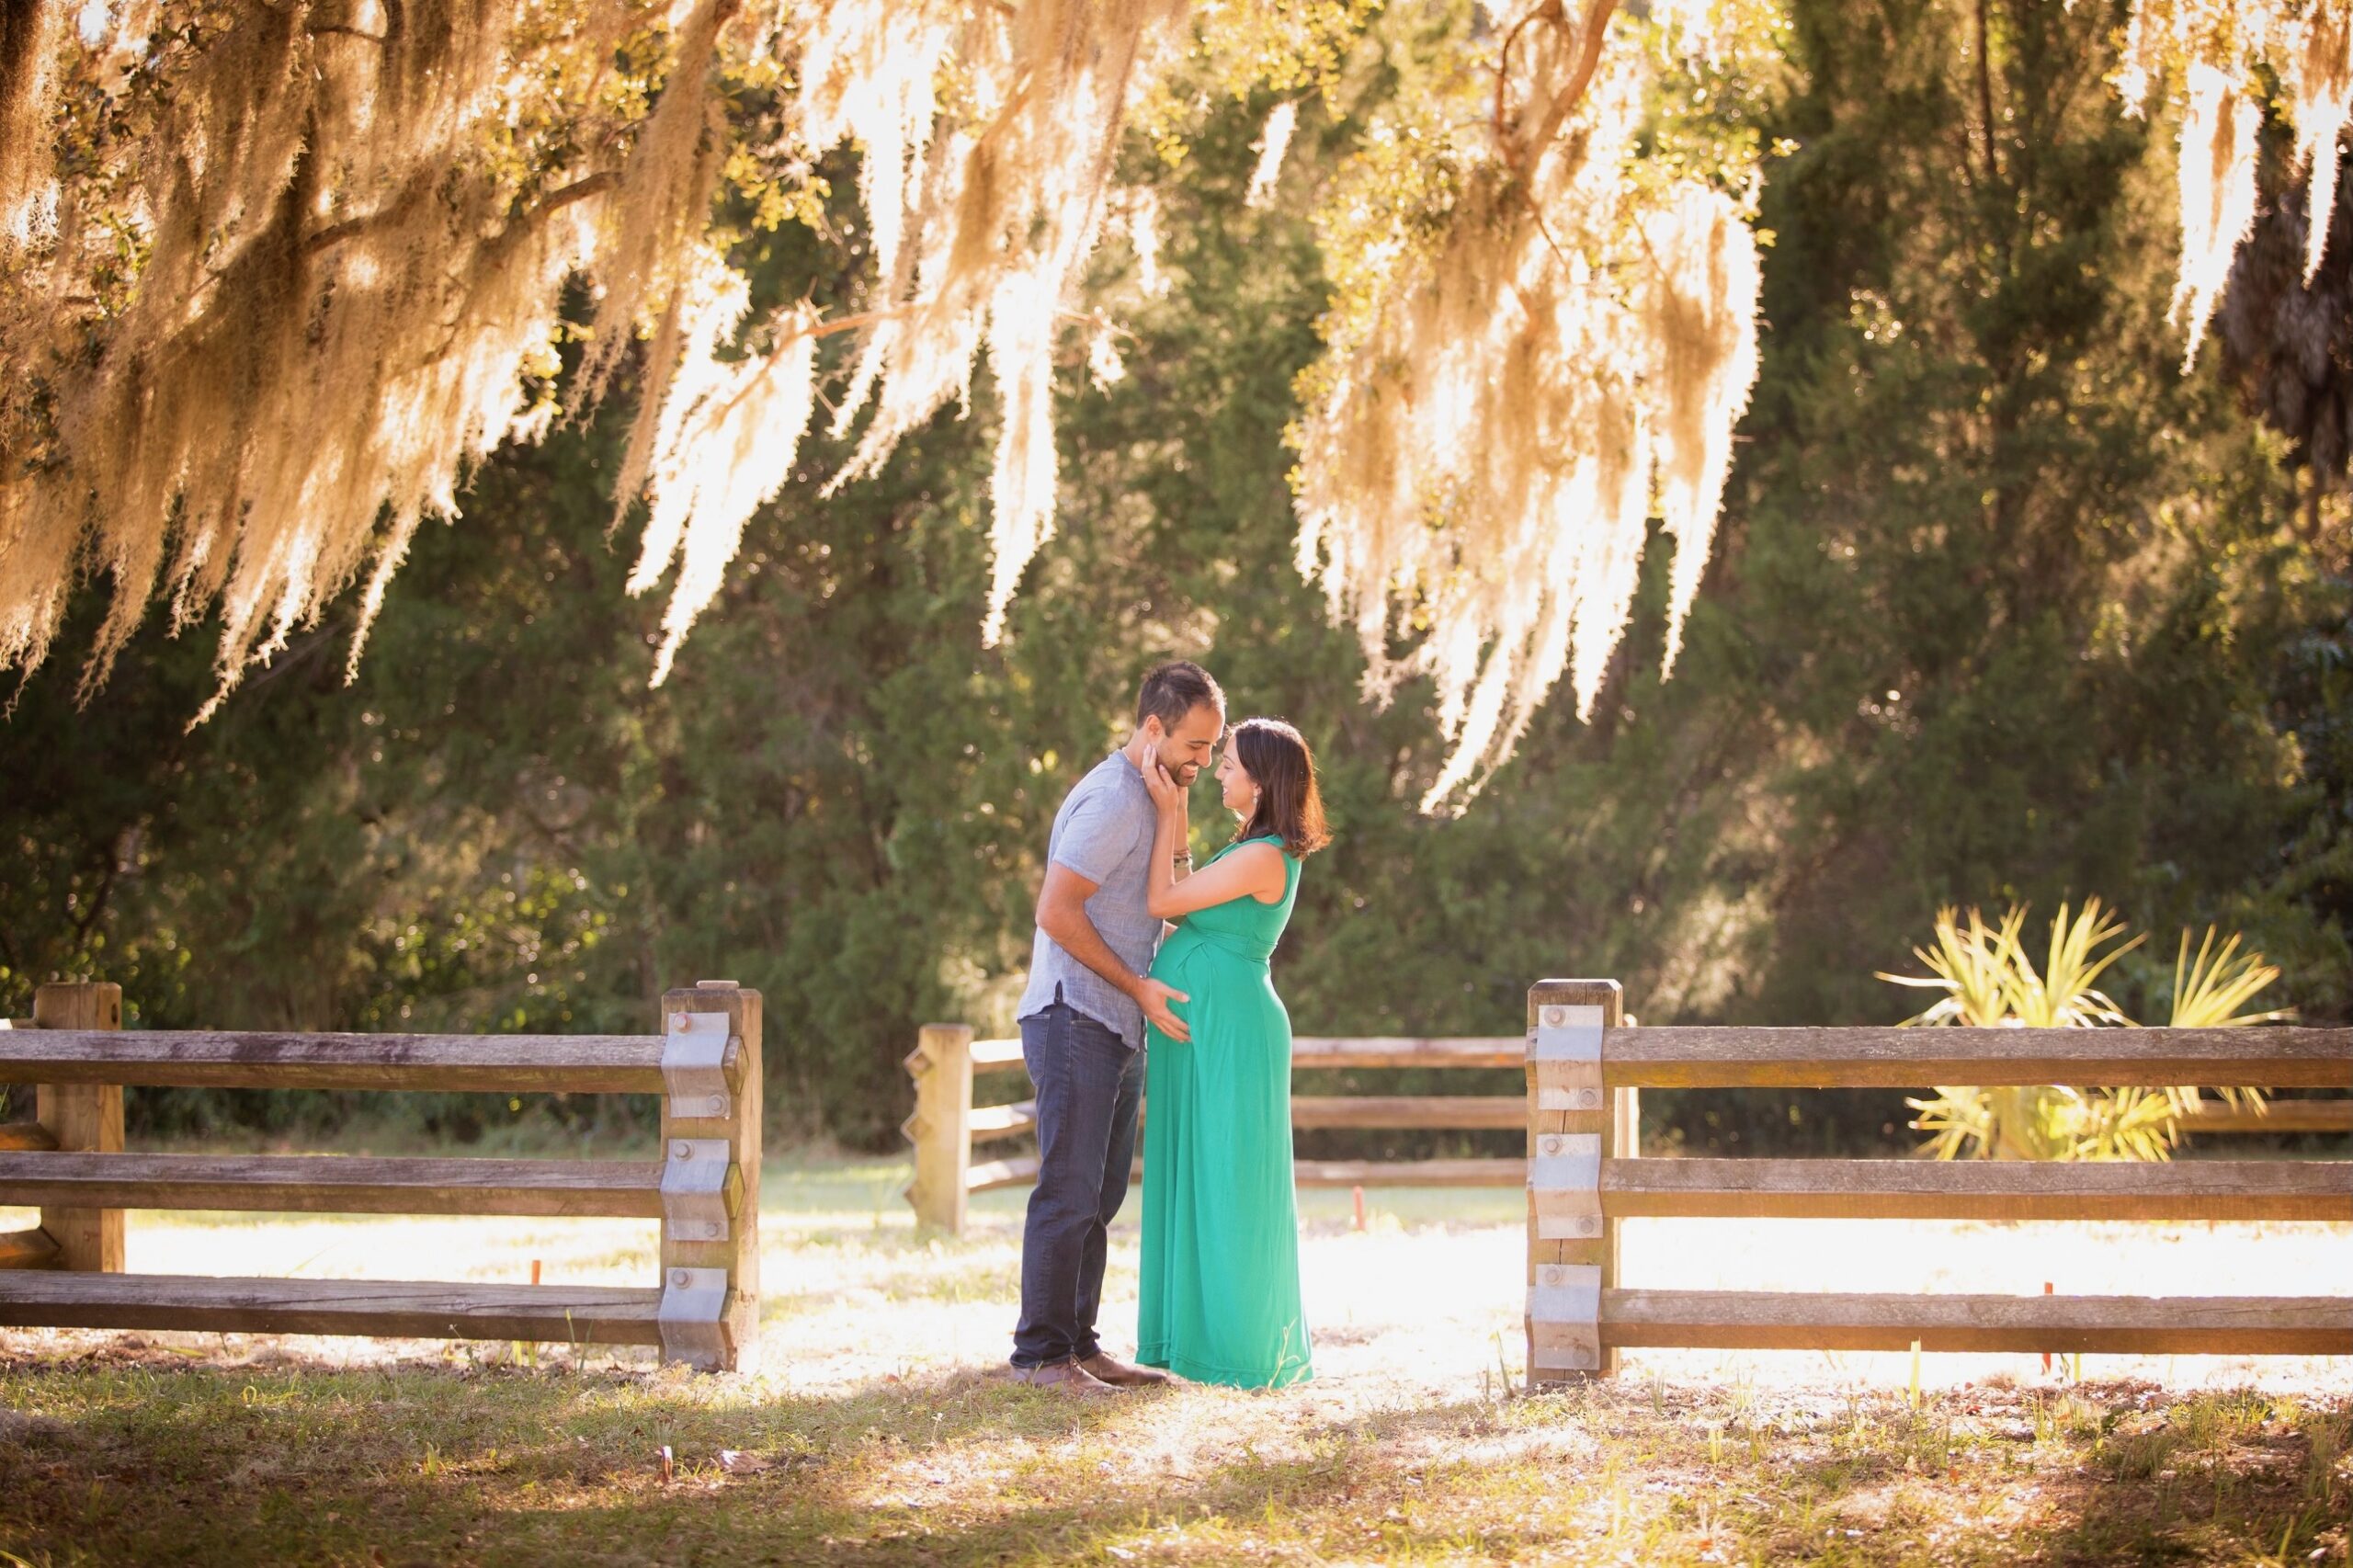 Man leans in to kiss pregnant wife under Spanish moss at Philippe Park in Safety Harbor